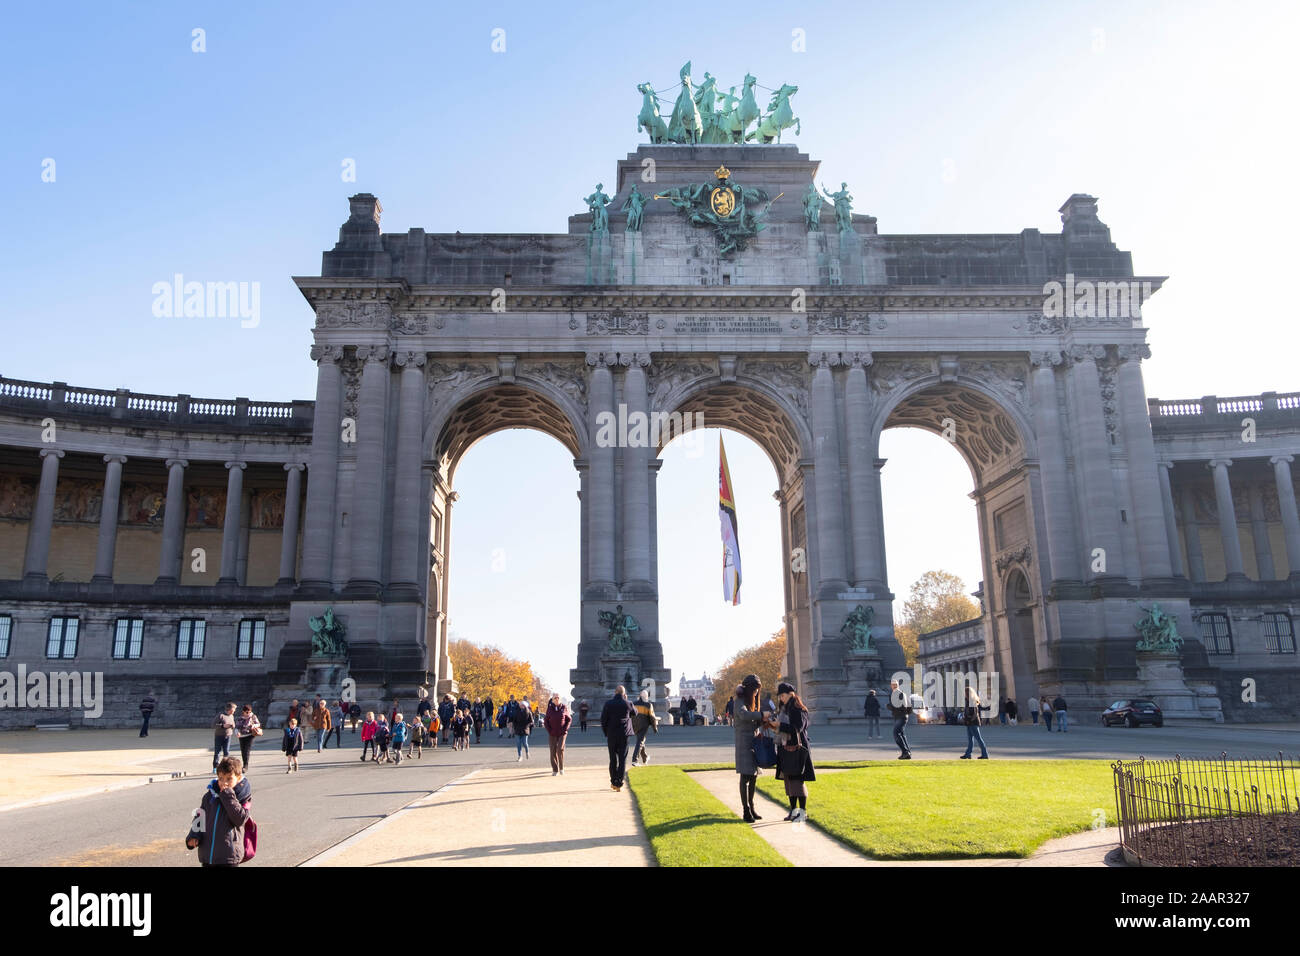 BRUSSELS, BELGIUM, November 10 2019: Triumphal Arch in Jubilee Park (Parc du Cinquantenaire). Built in 1880 for the 50th anniversary of Belgium. Stock Photo